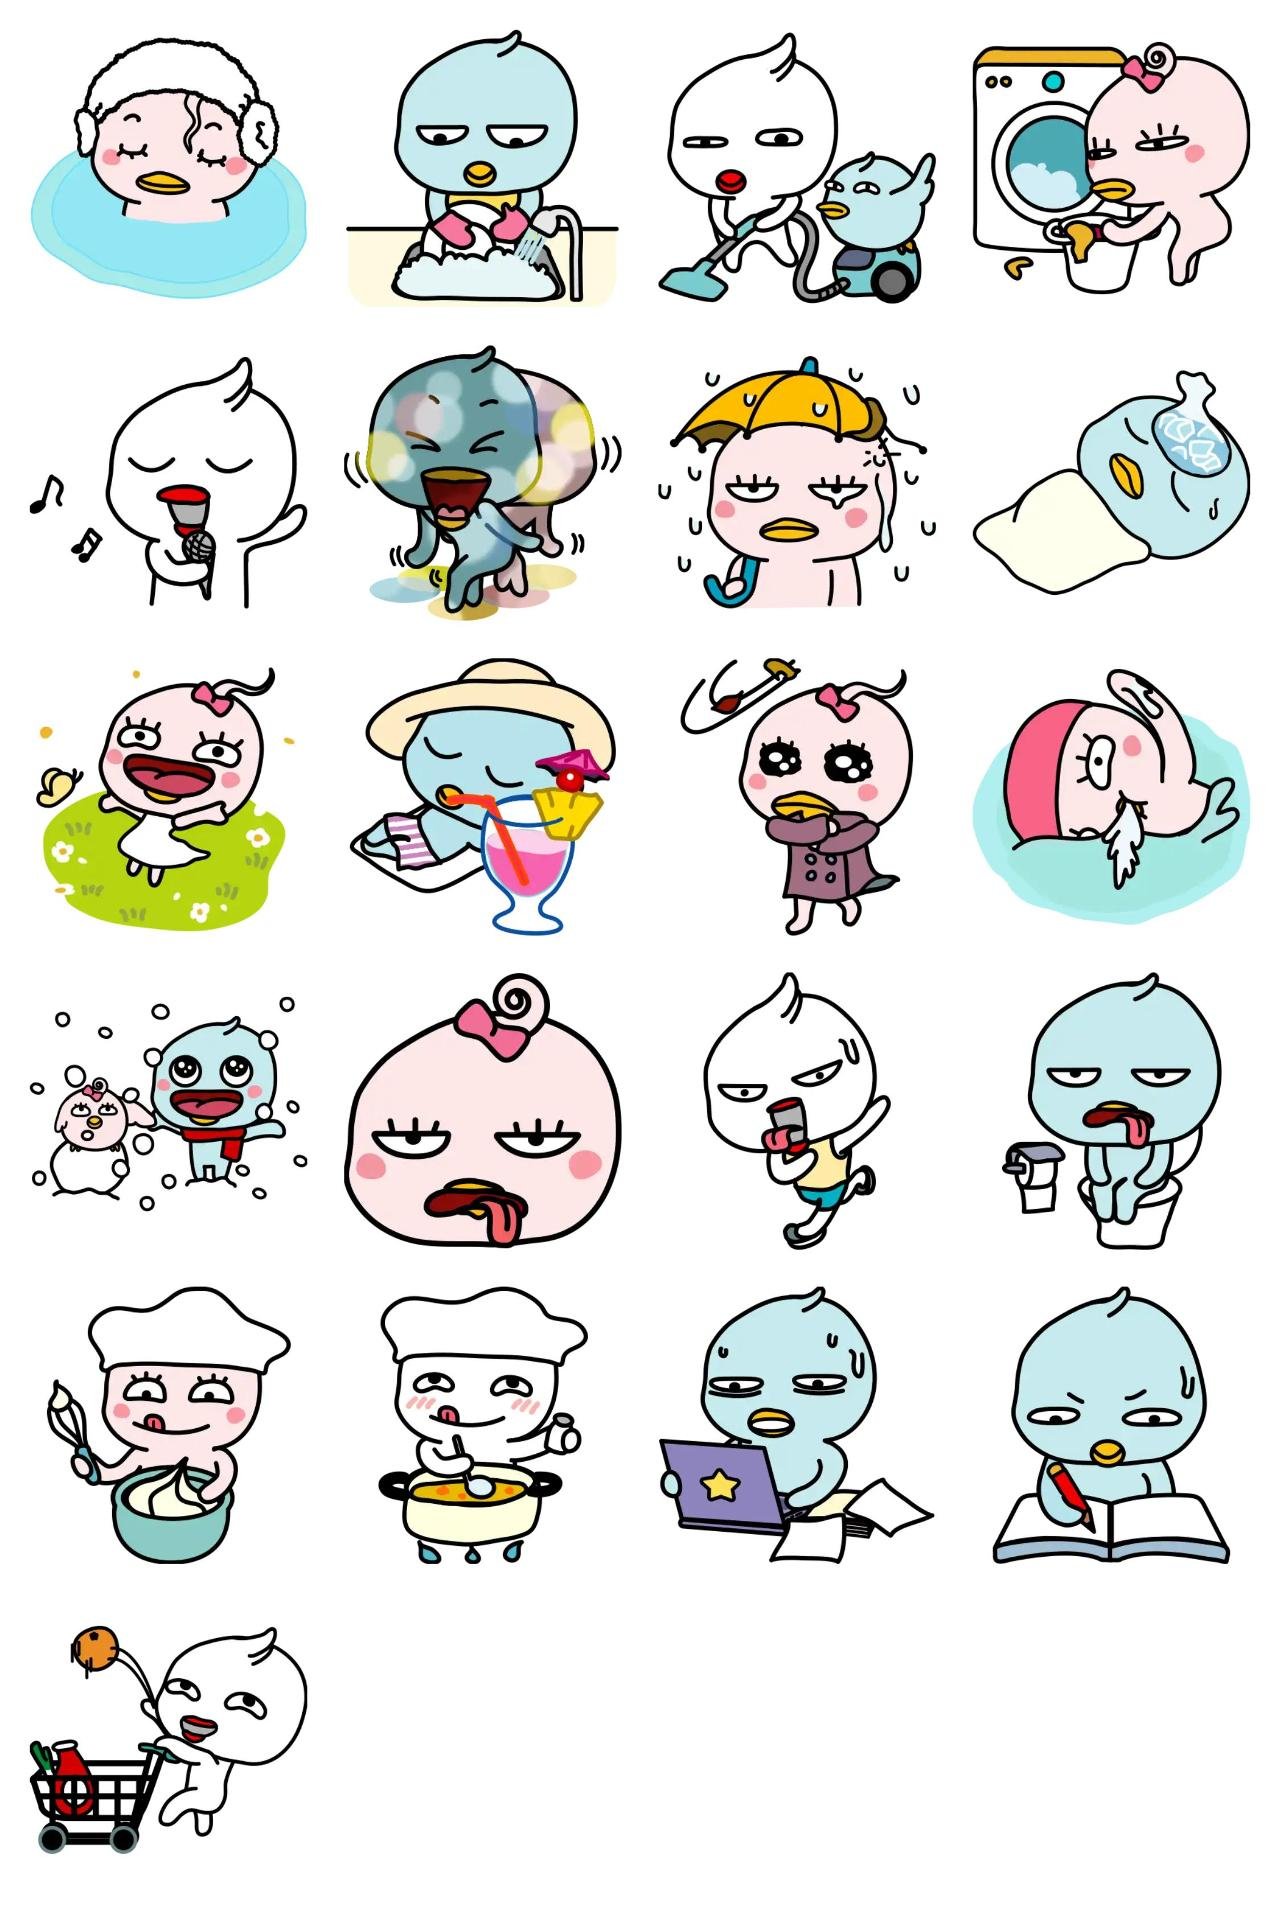 minky,dinky,winky-daily life 2 Animals,Etc. sticker pack for Whatsapp, Telegram, Signal, and others chatting and message apps